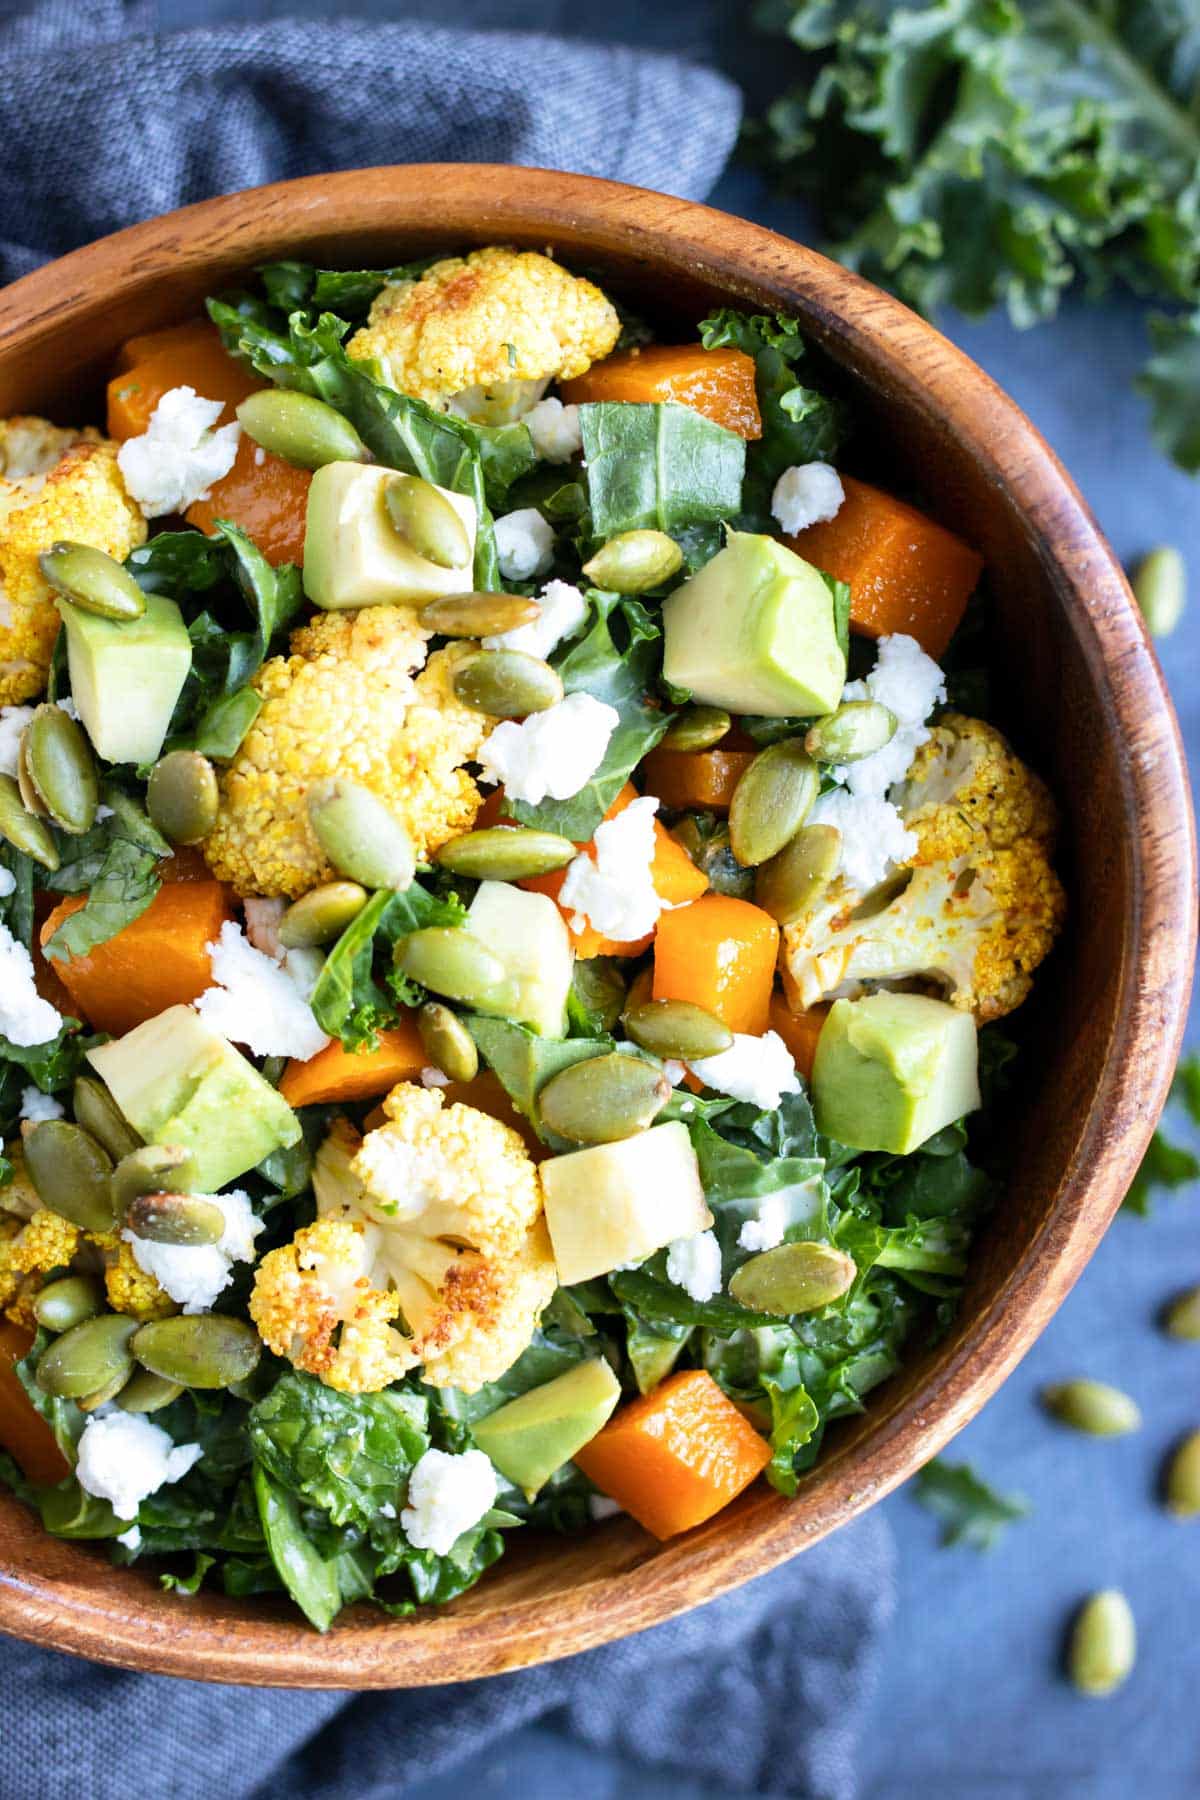 Roasted Cauliflower Kale Salad with Tahini Dressing RECIPE served in a wooden bowl.